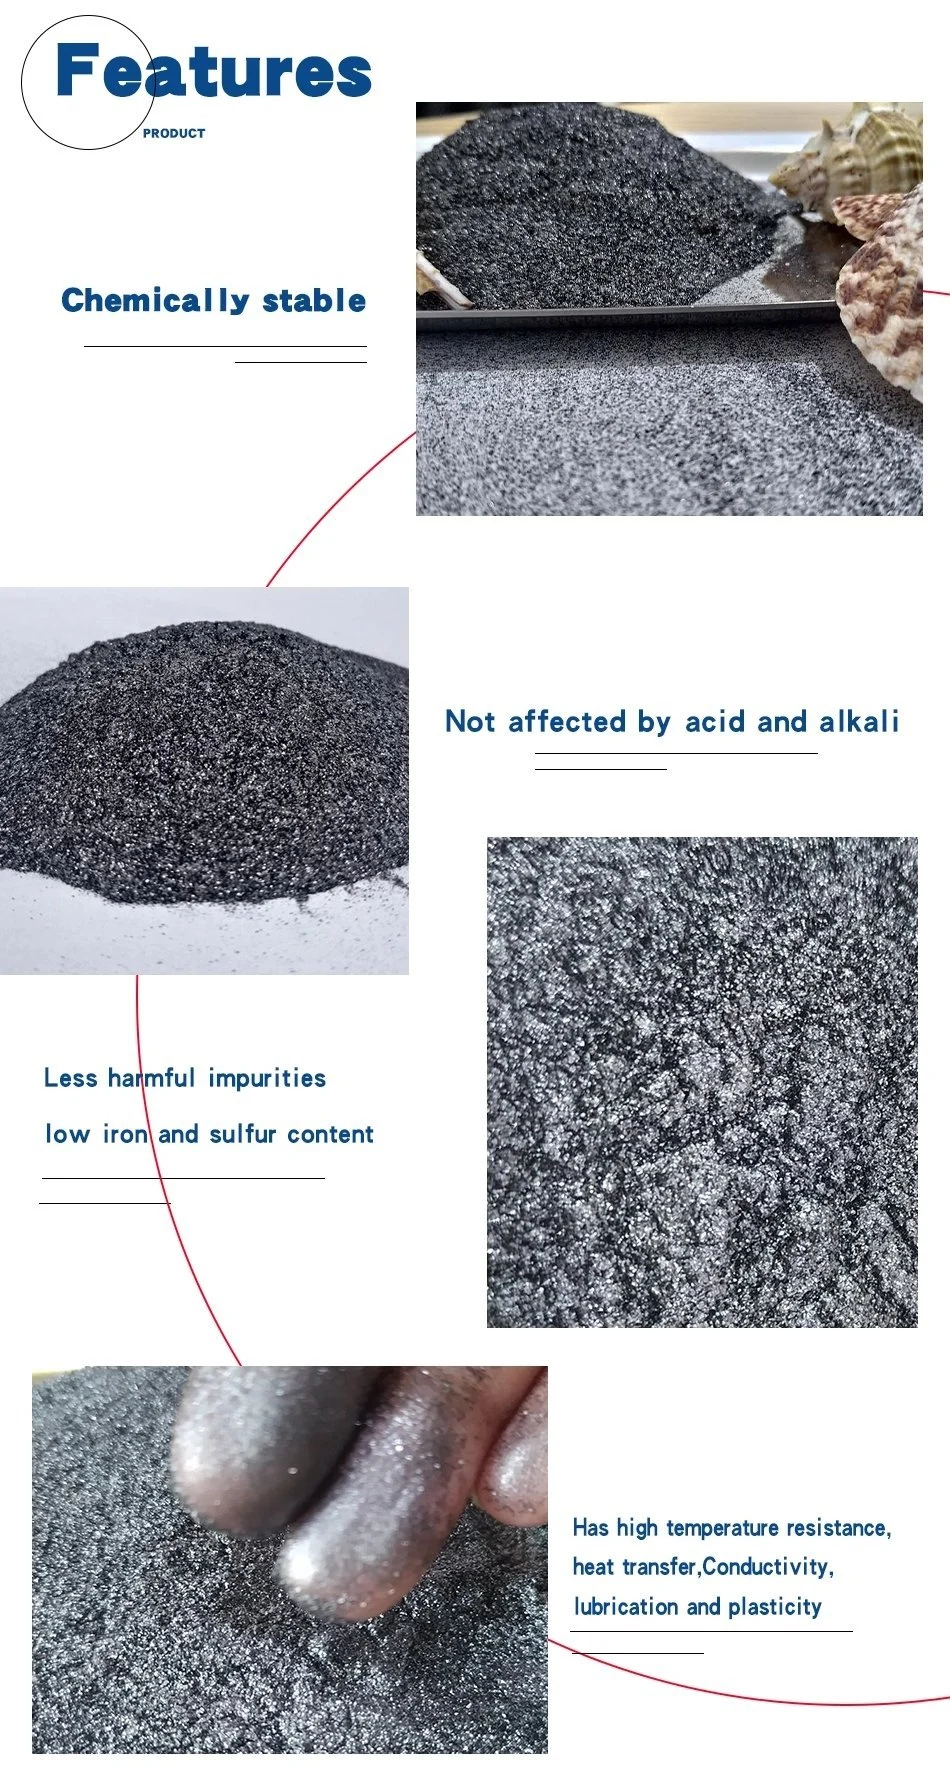 High Carbon Flake Graphite Powder for Sale Has Strong Self Lubrication, Strong Thermal Conductivity and Conductivity